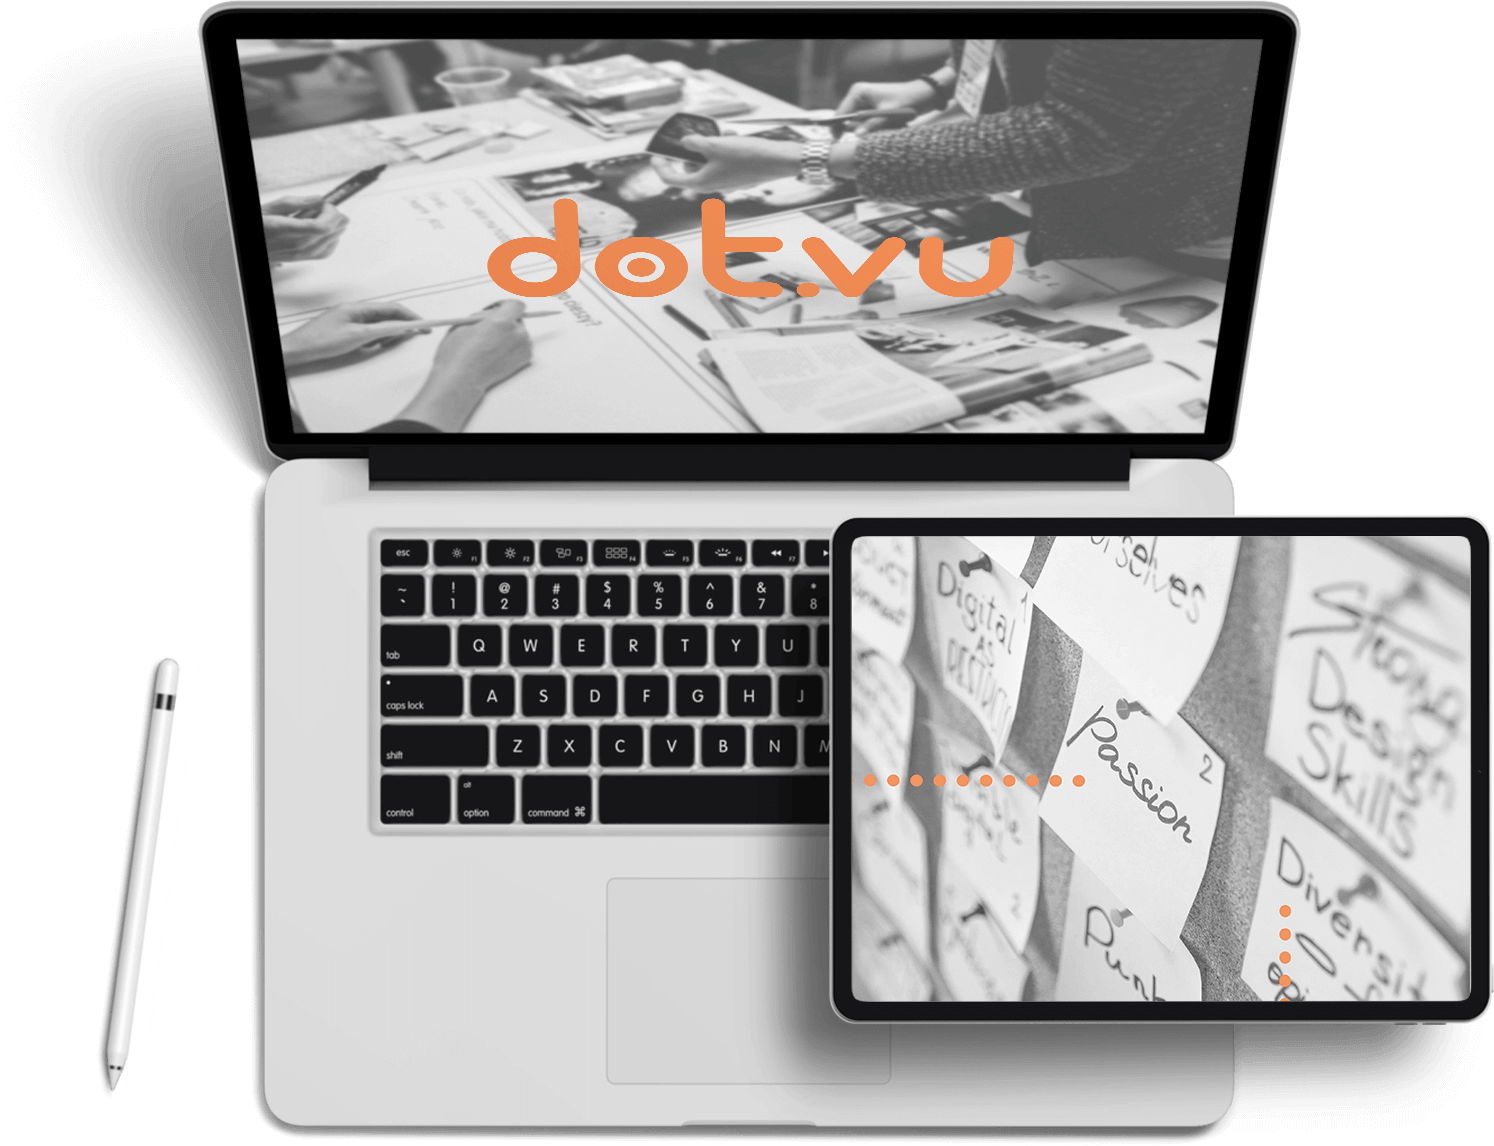 Join Dot.vu and create Interactive Content for brands all over the world! 